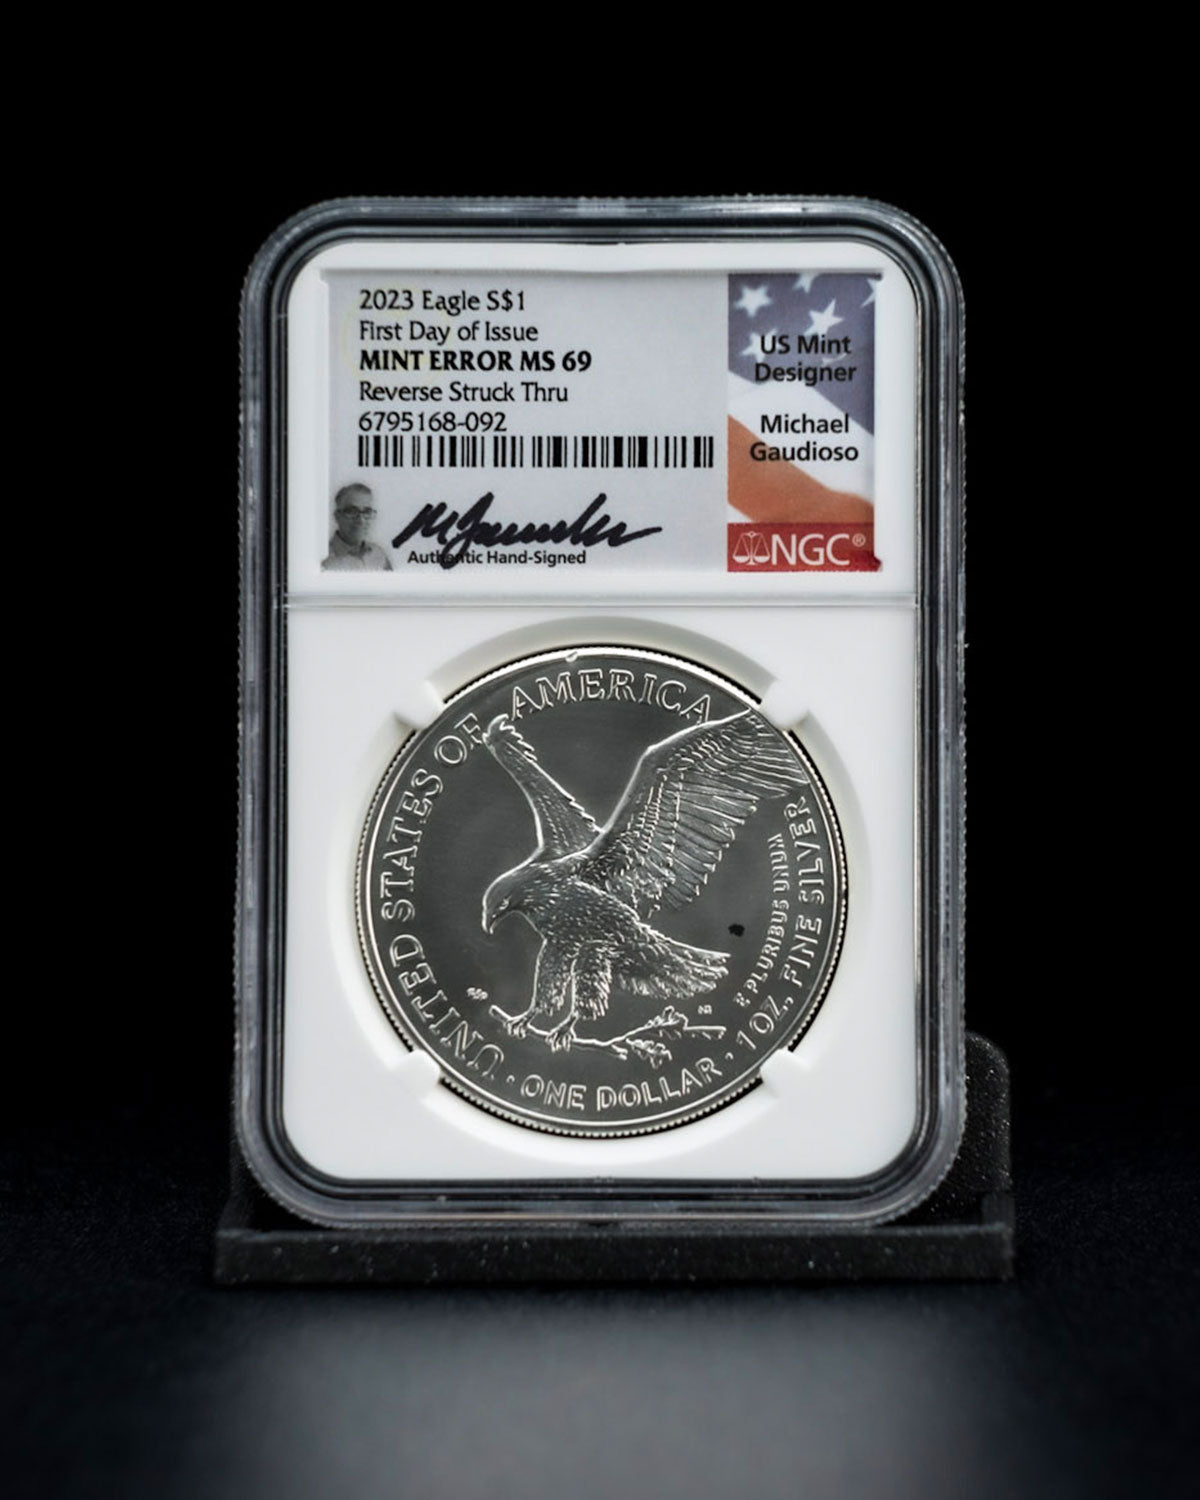 2023 S$1 Eagle | First Day of Issue Mint Error MS69 Reverse Struck Thru | Michael Gaudioso Autographed